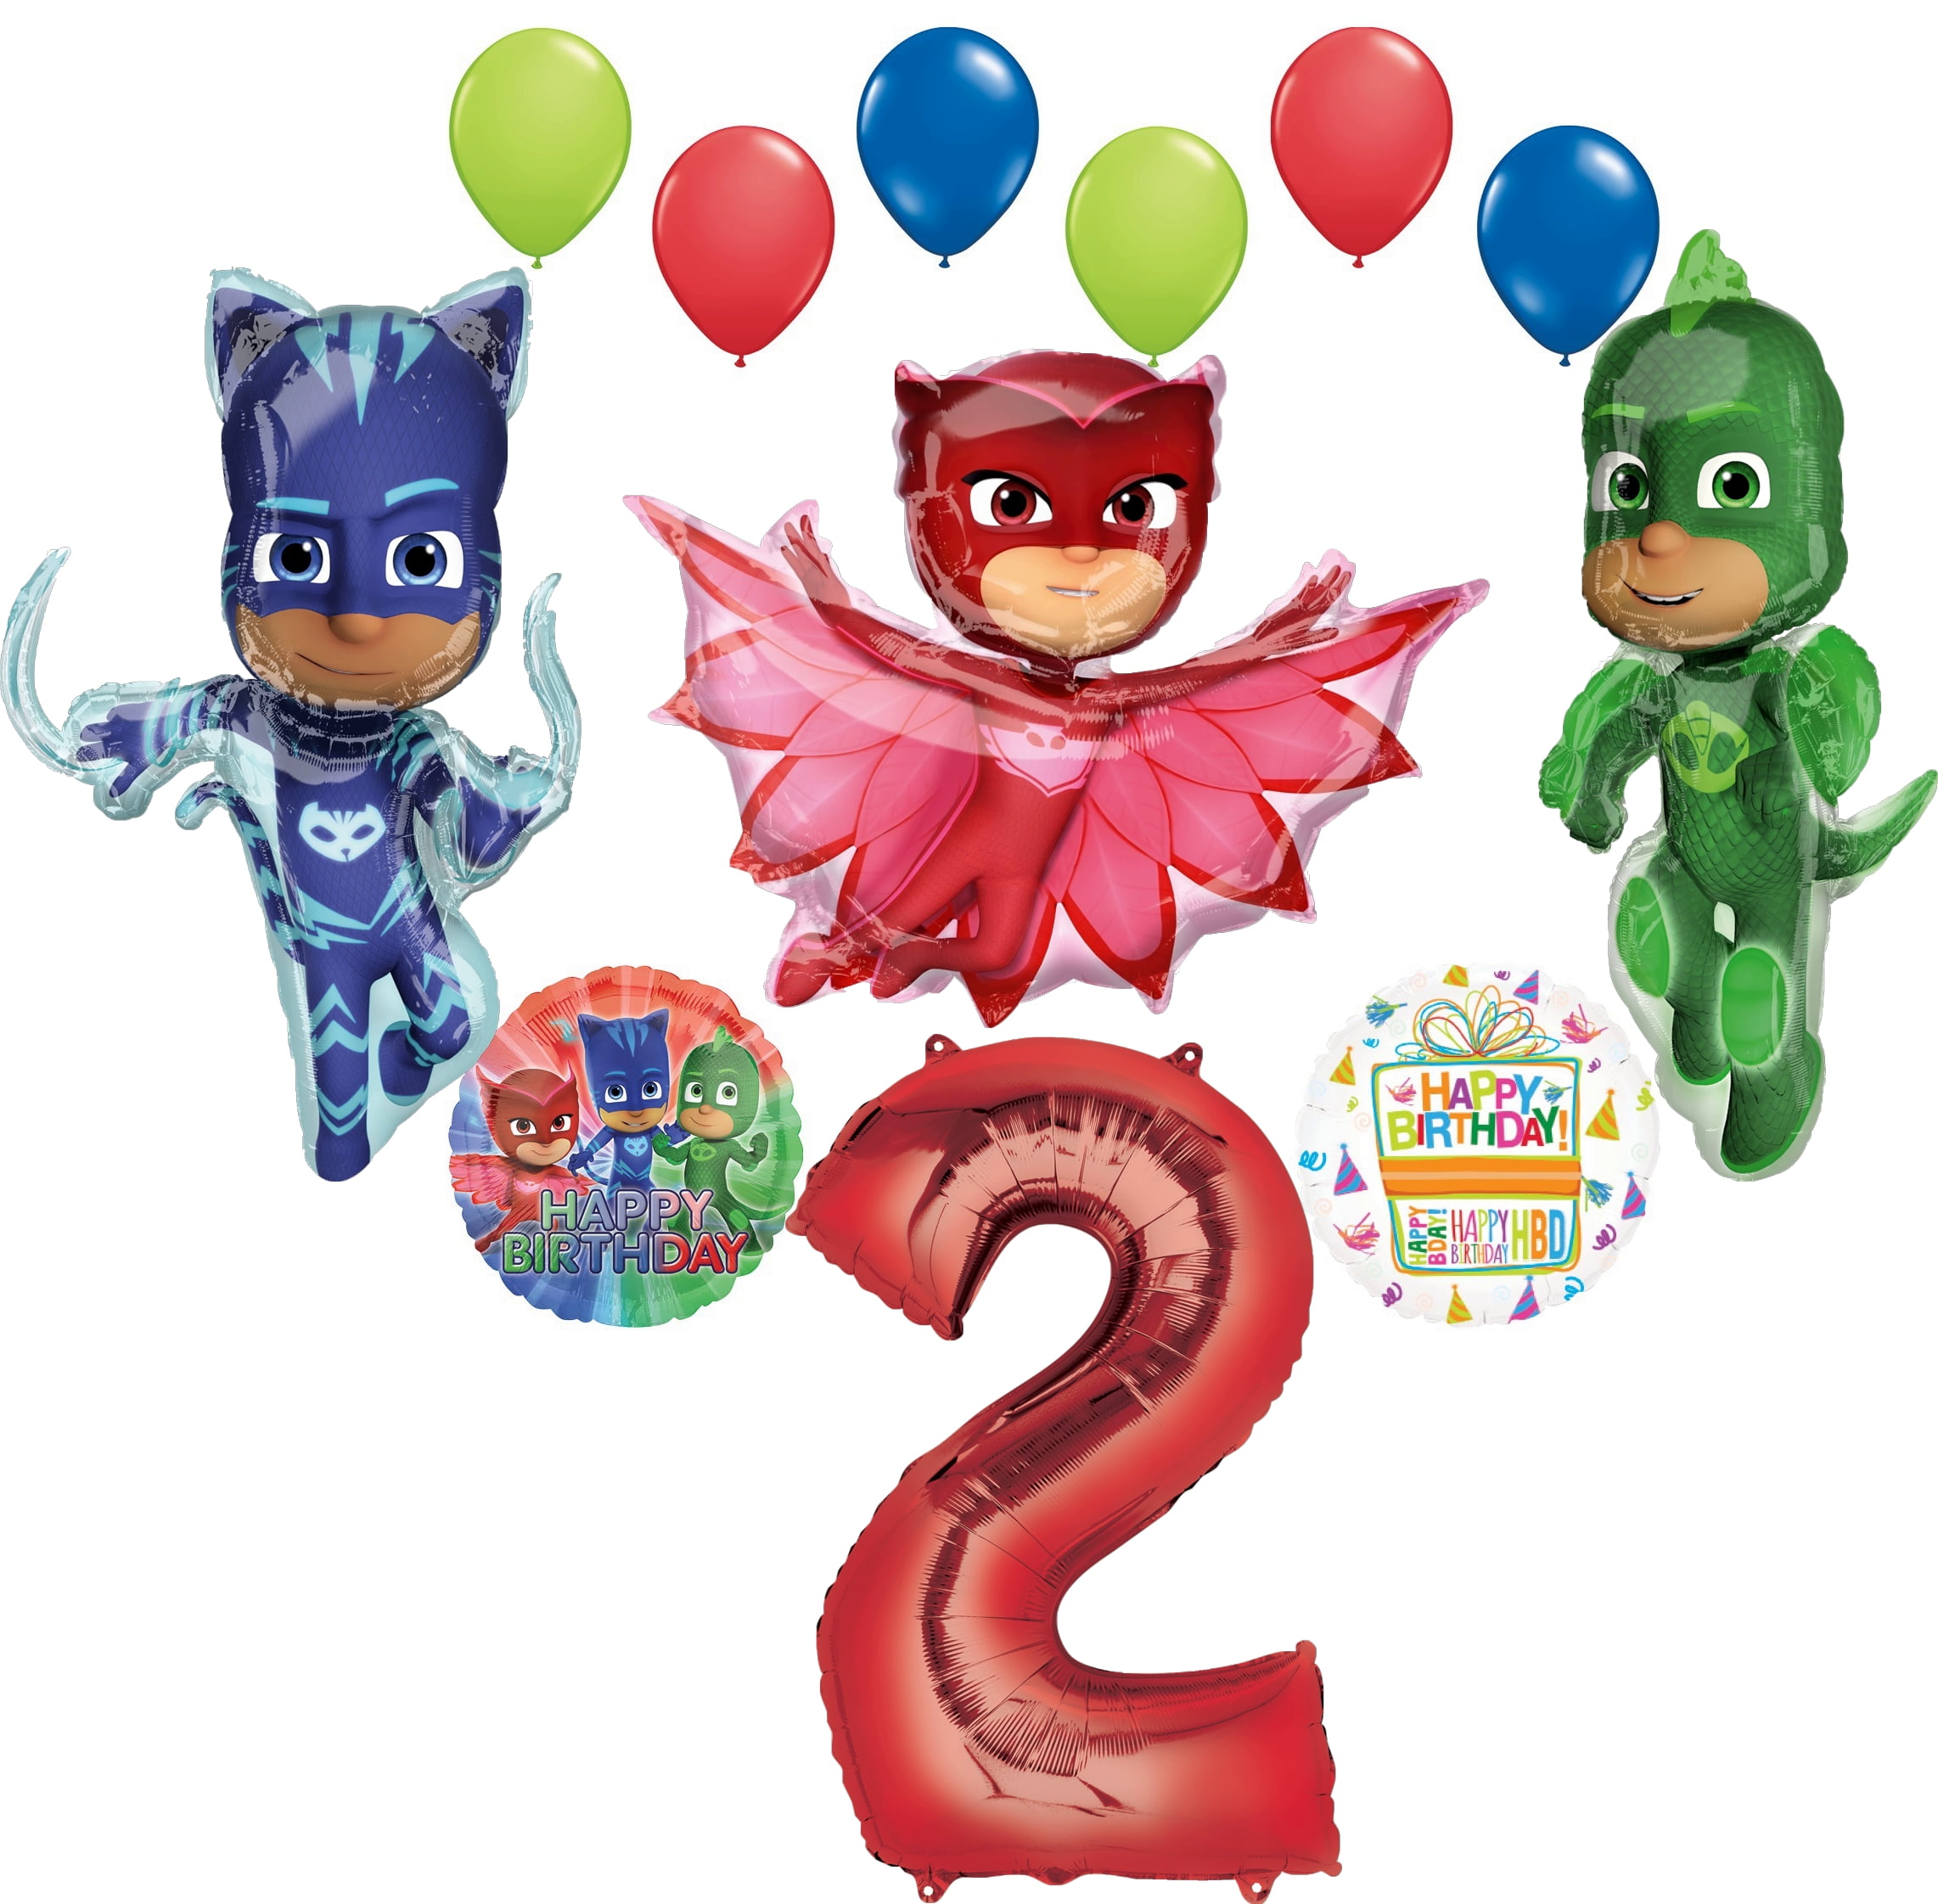 The Ultimate PJ MASKS 5th Birthday Party Supplies and Balloon decorations Mayflower